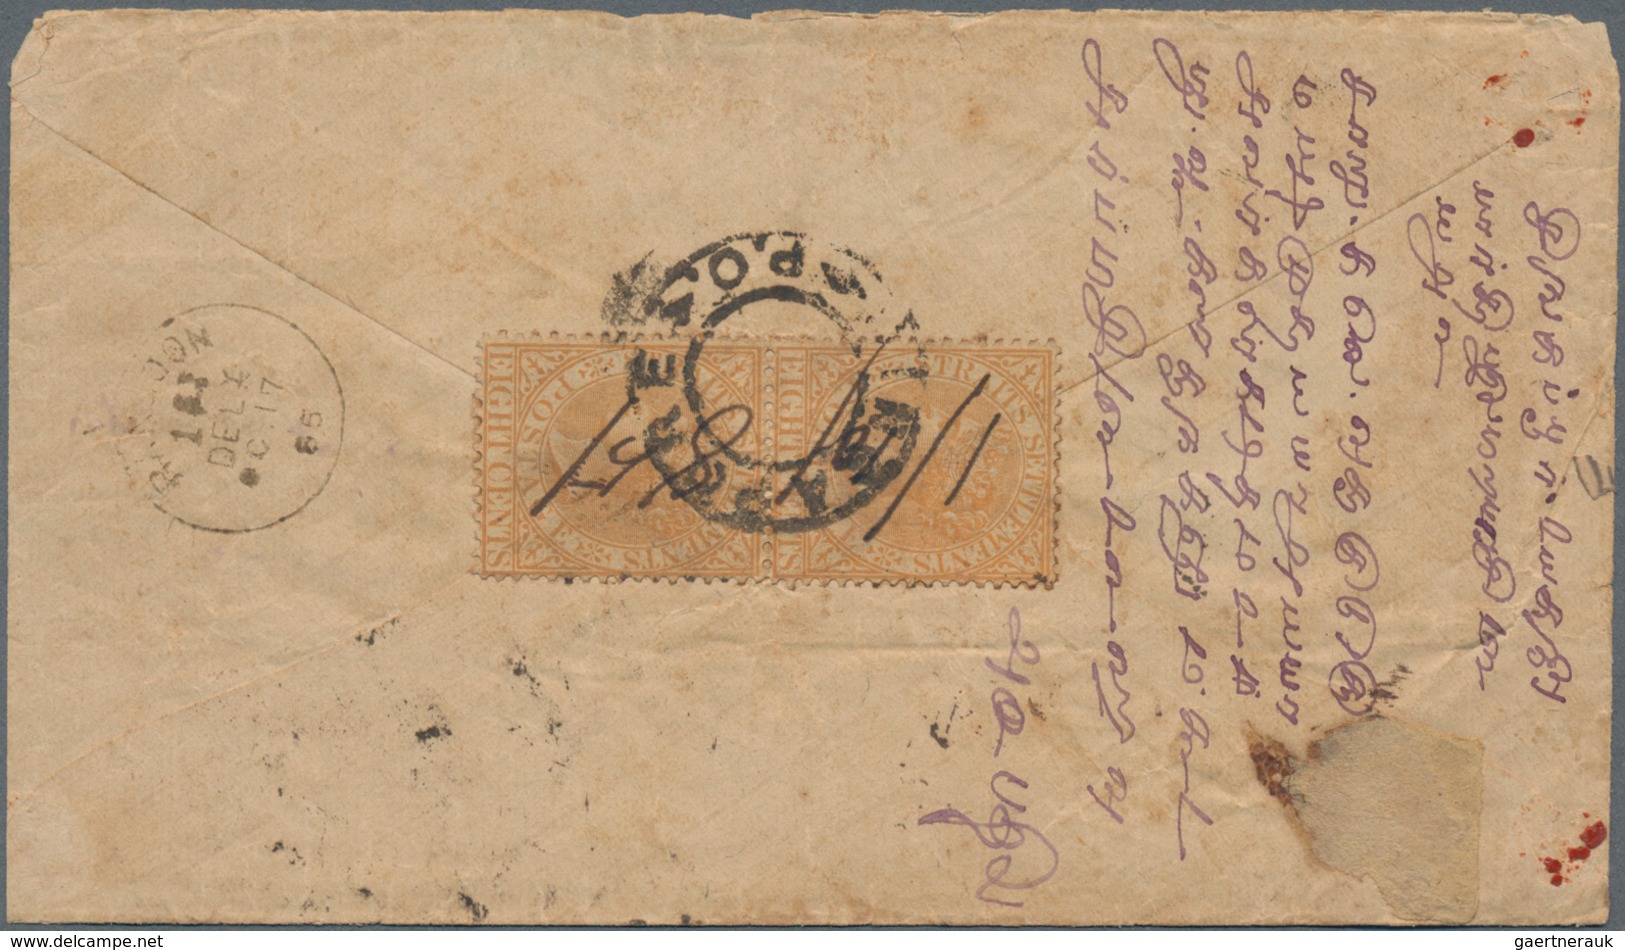 Singapur: 1885 Registered Cover From Singapore To Rangoon, Burma Franked On The Reverse By Straits 8 - Singapur (...-1959)